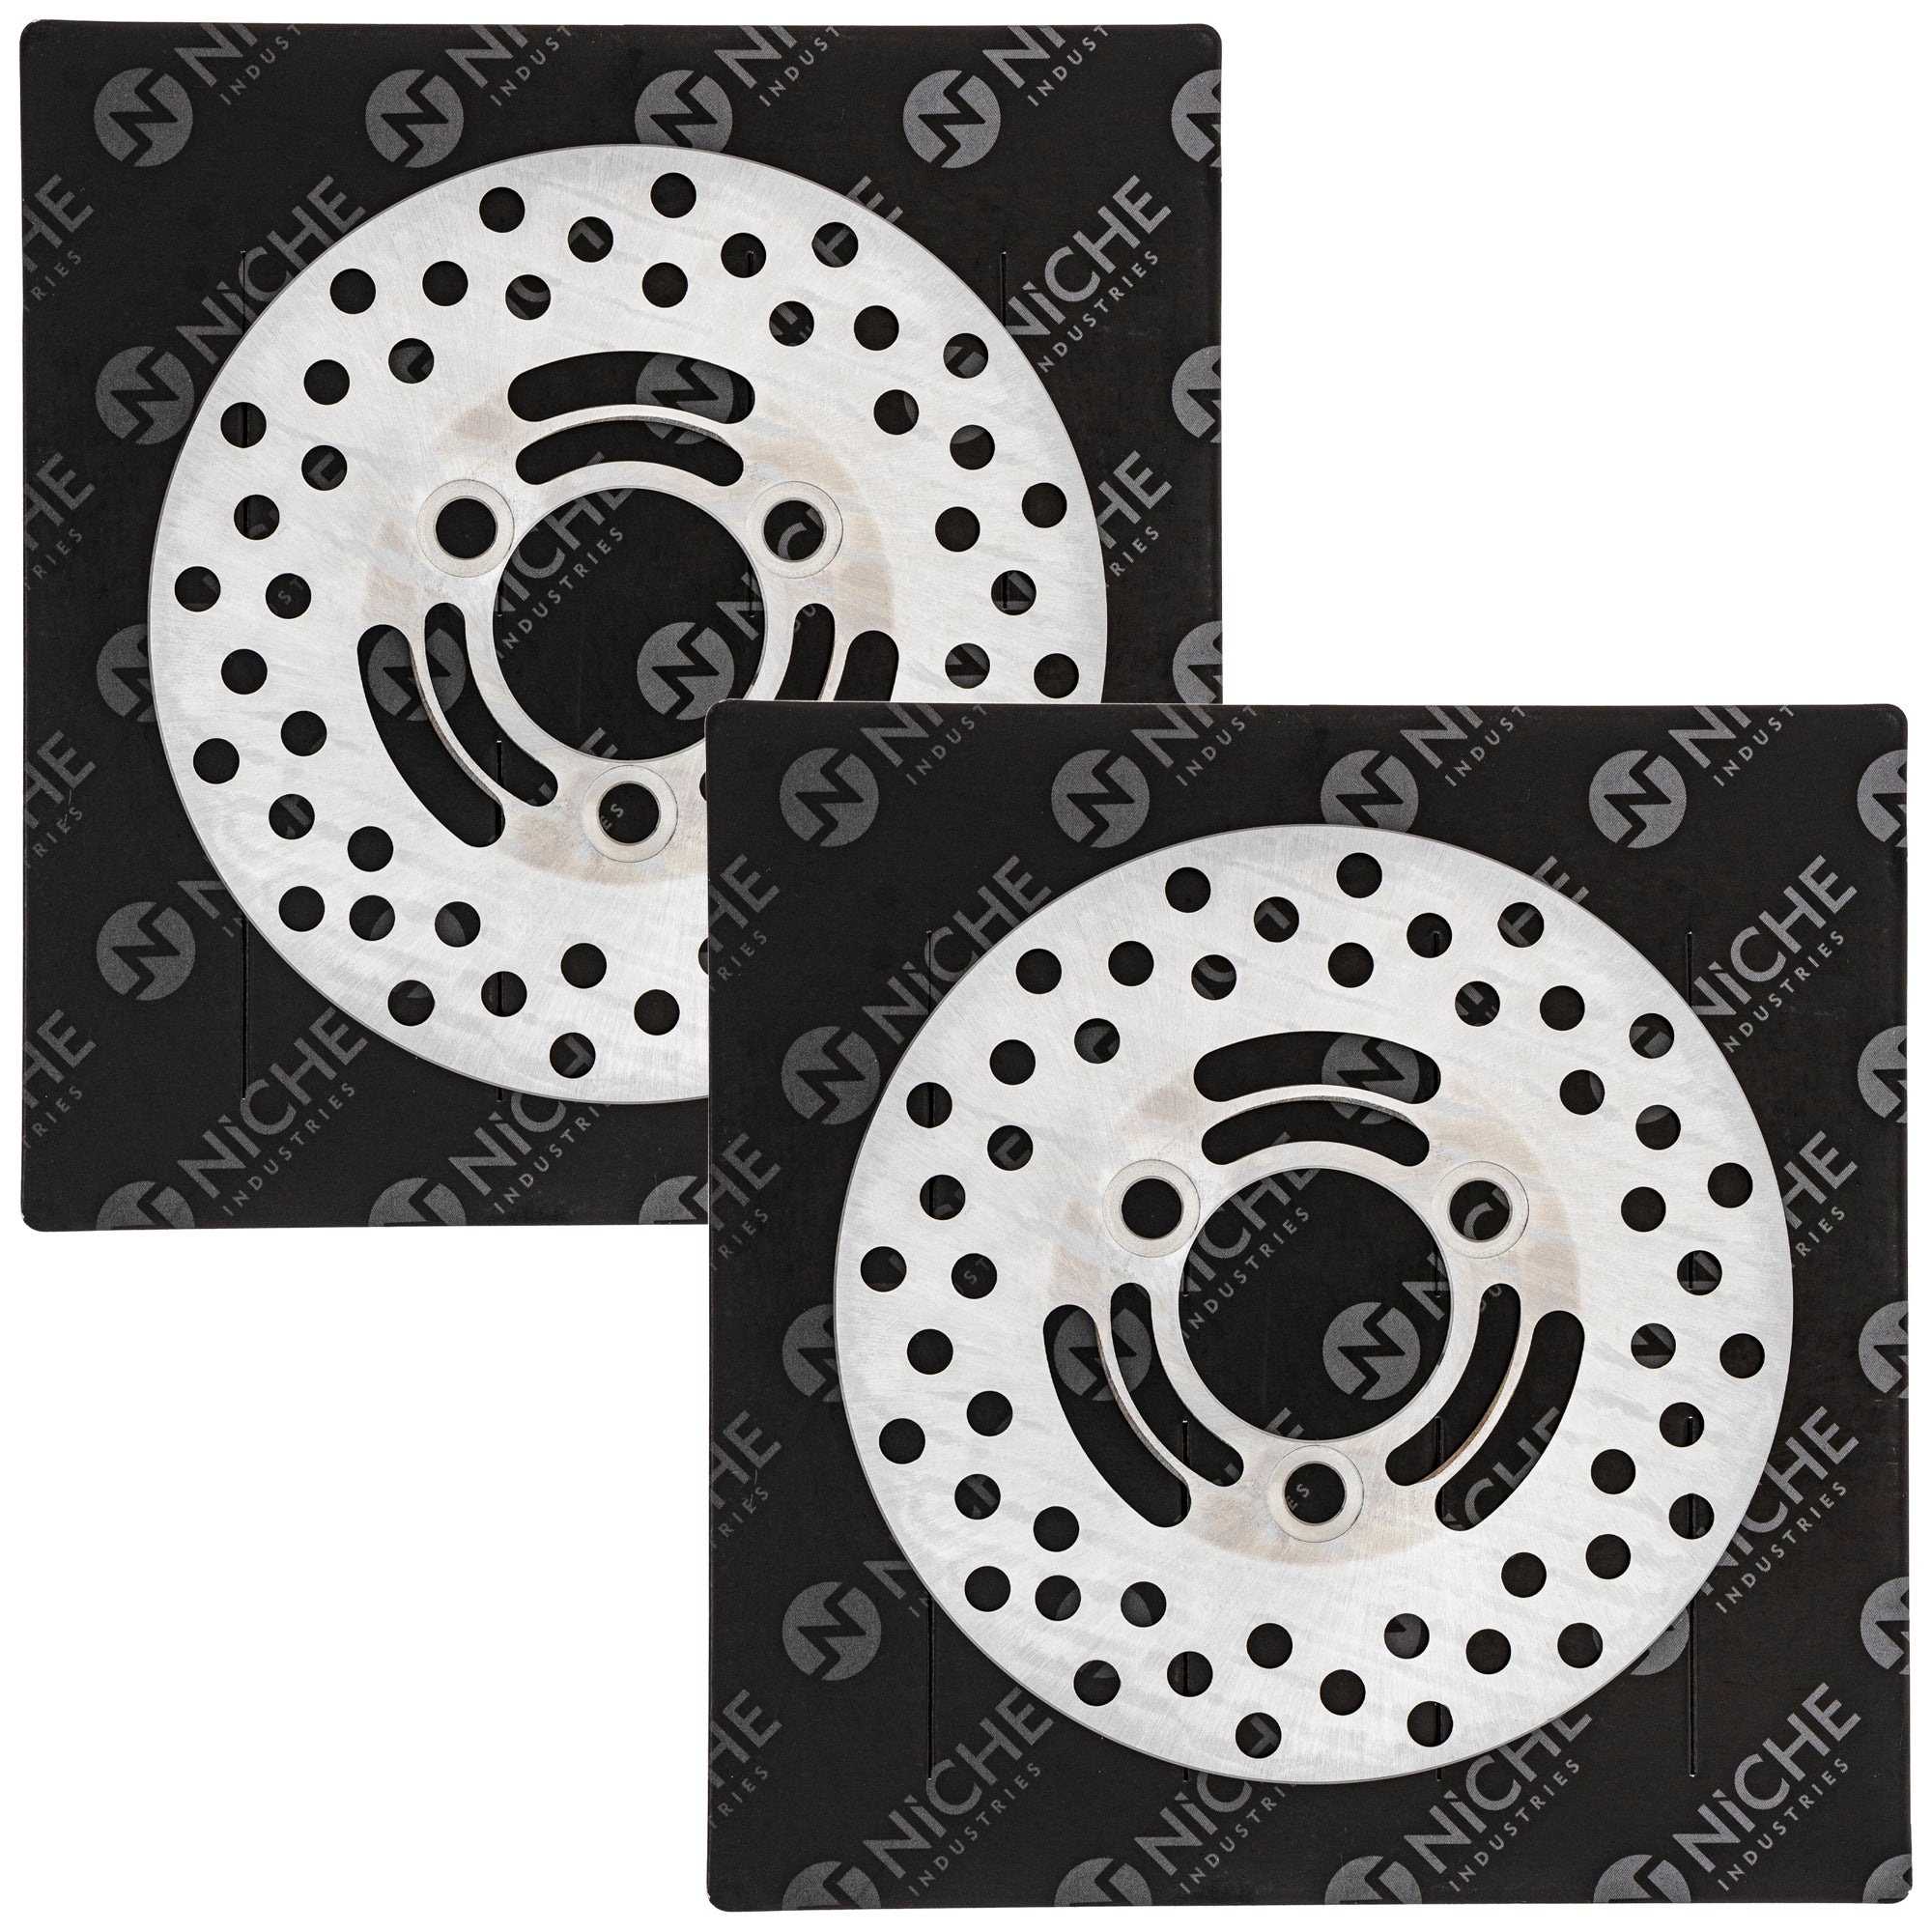 Brake Rotor Set 2-Pack for zOTHER Arctic Cat Textron Cat NICHE 519-CRT2225R